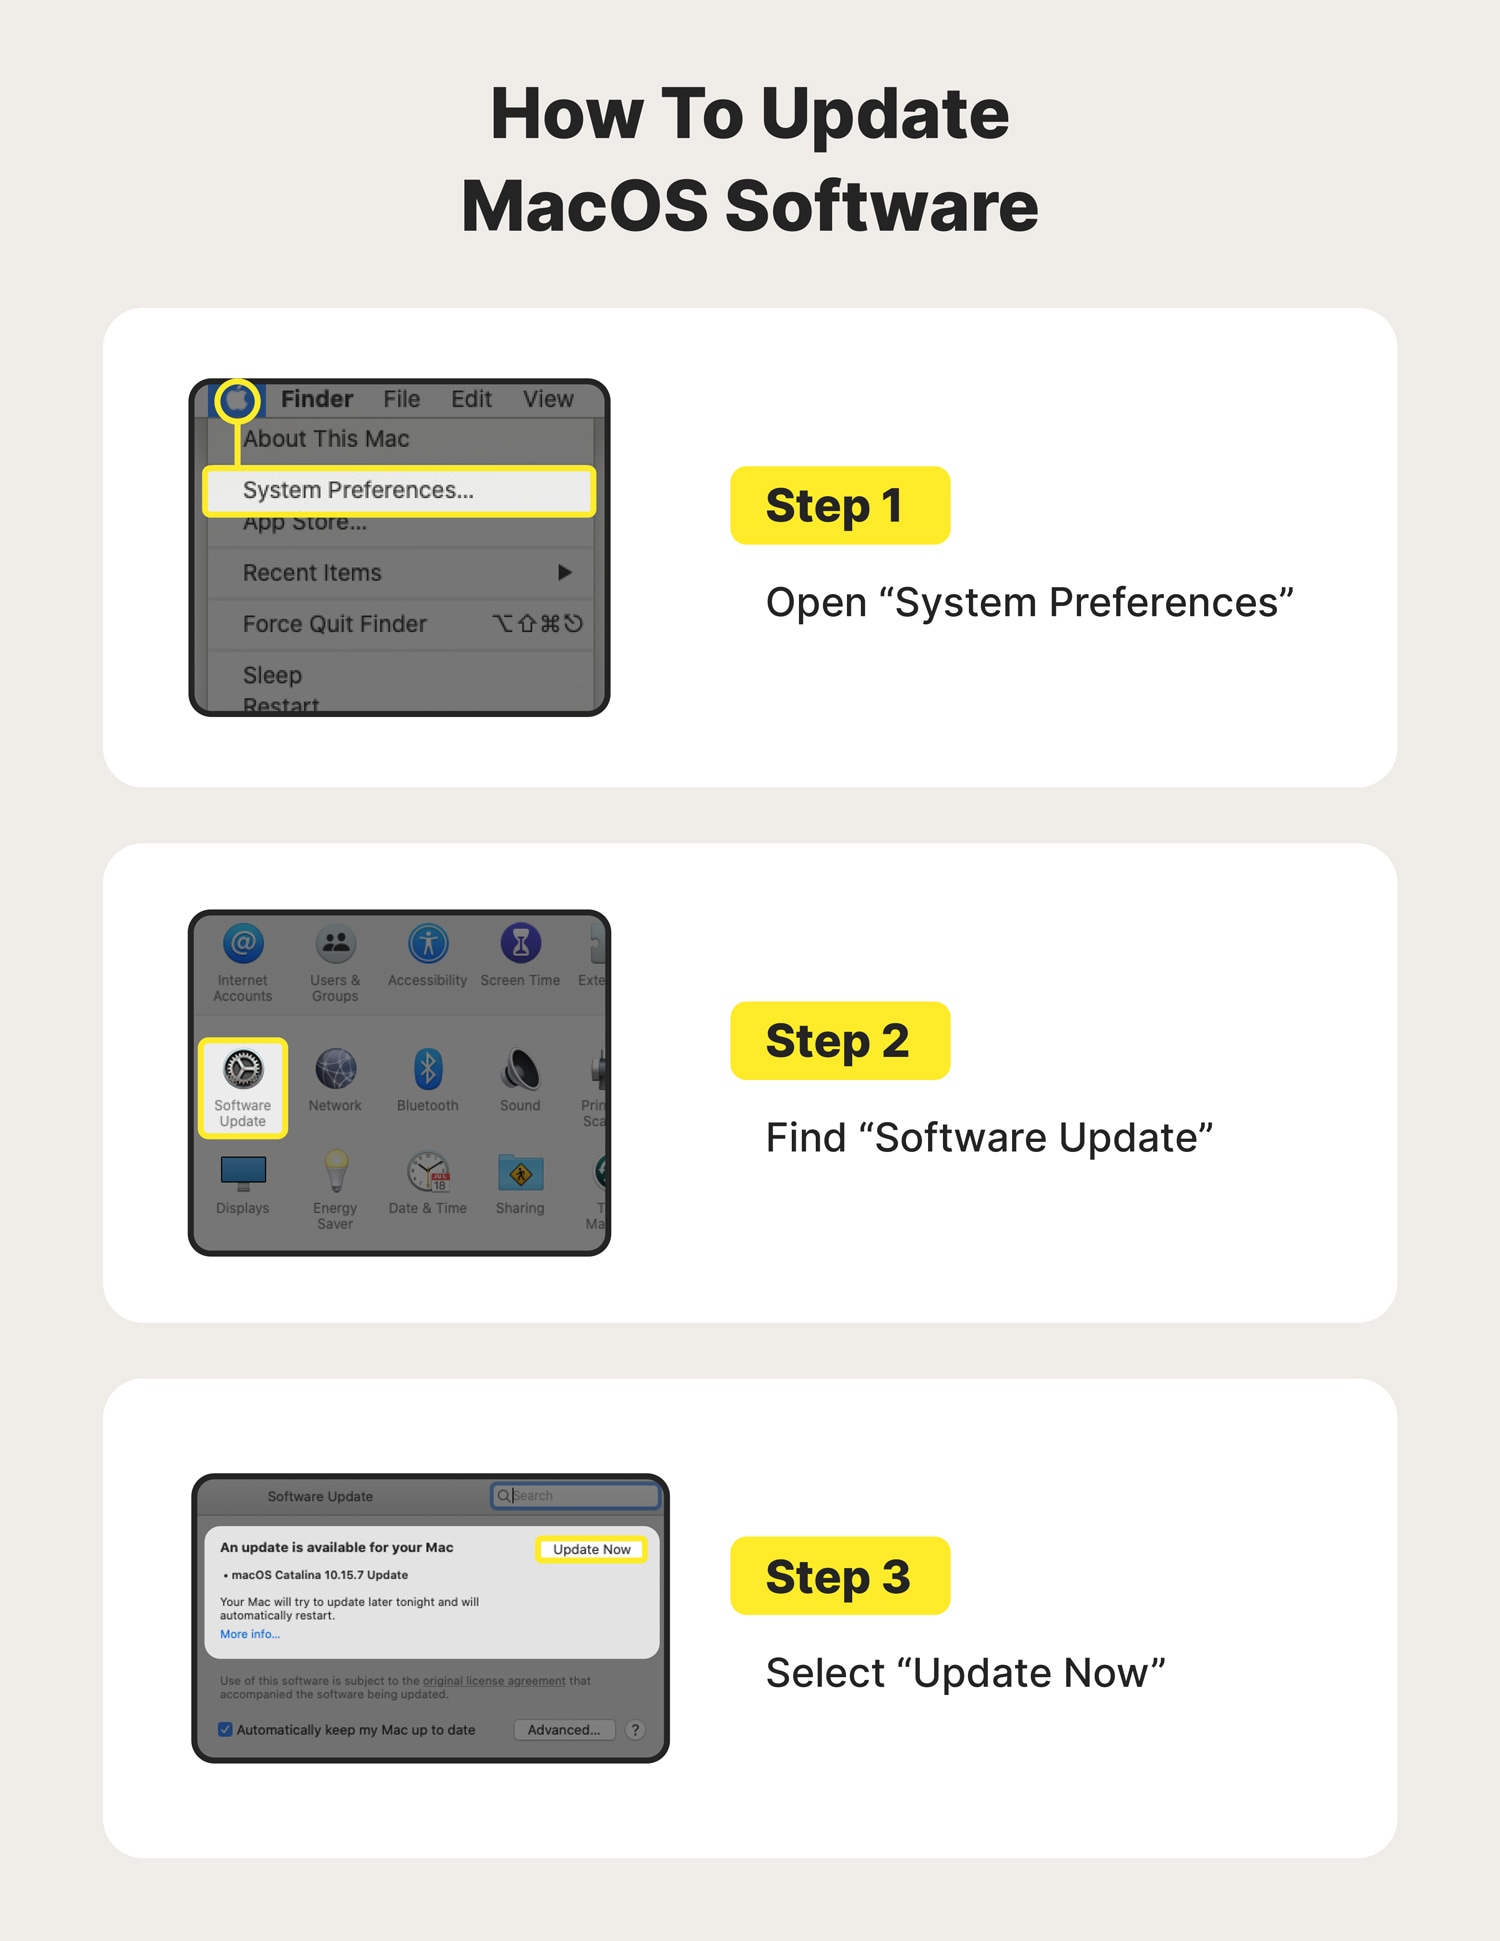 An image showing how to update MacOS software.